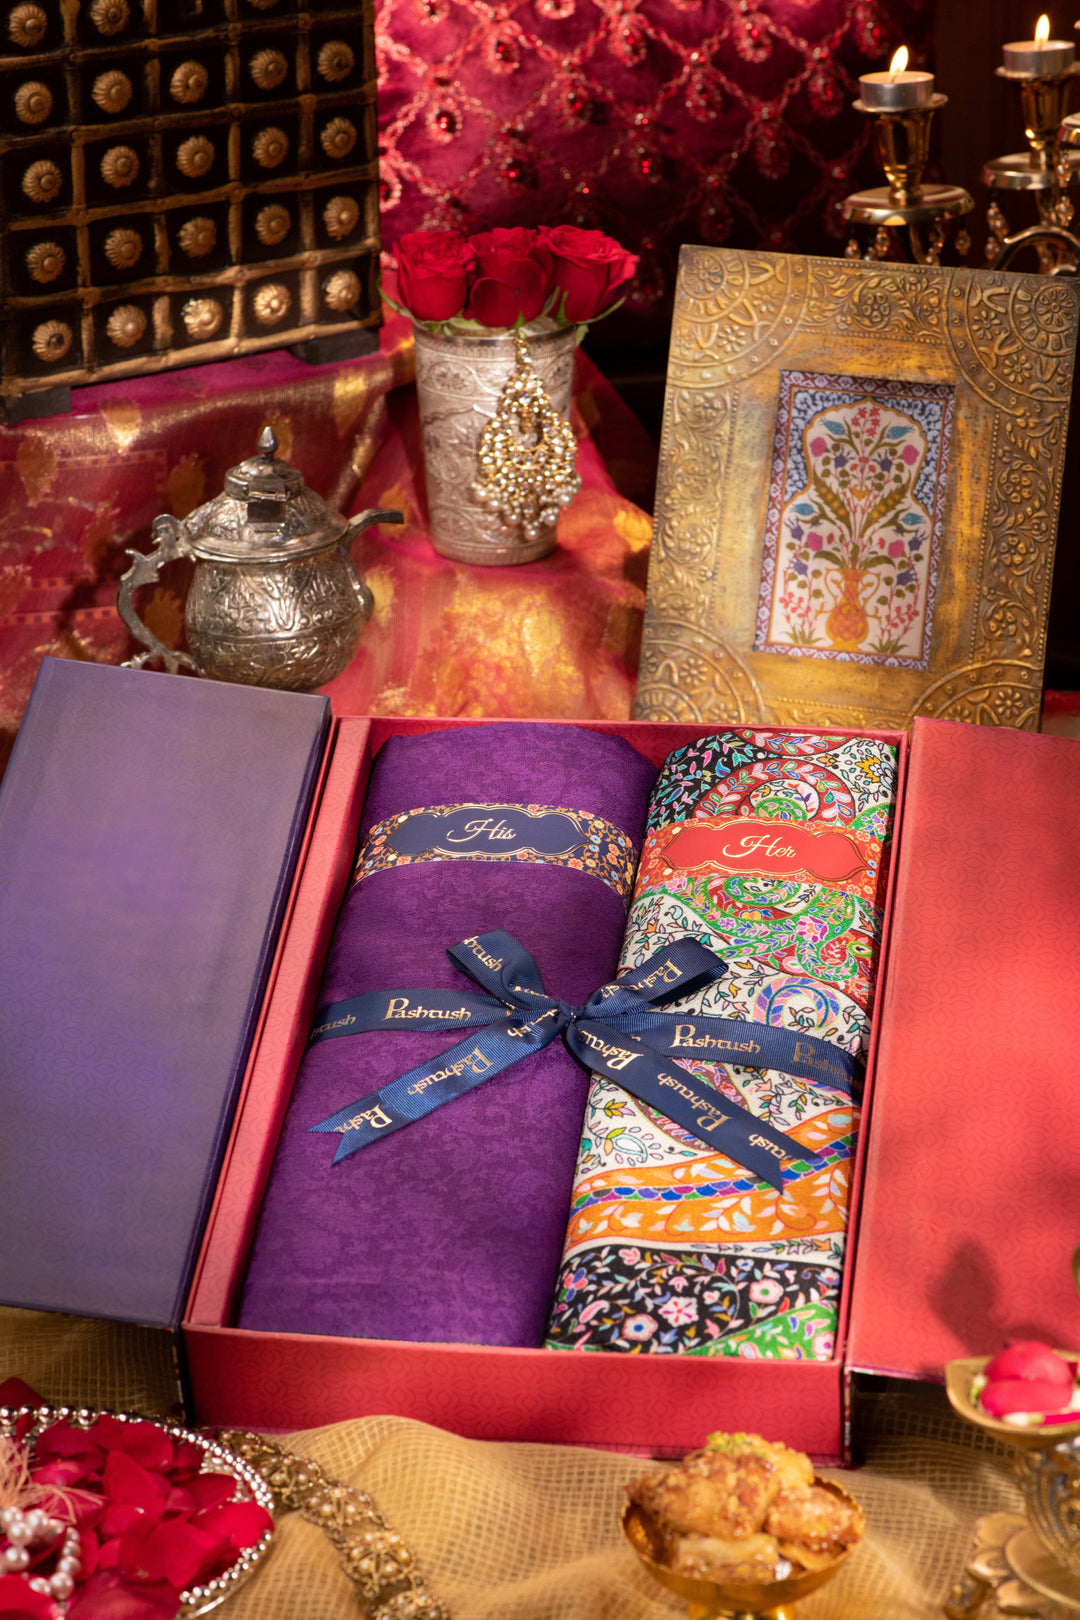 Pashtush India Gift Pack Pashtush His And Her Gift Set Of Fine Wool Self Stole and Bamboo Stole With Premium Gift Box Packaging, Purple and Multicolour